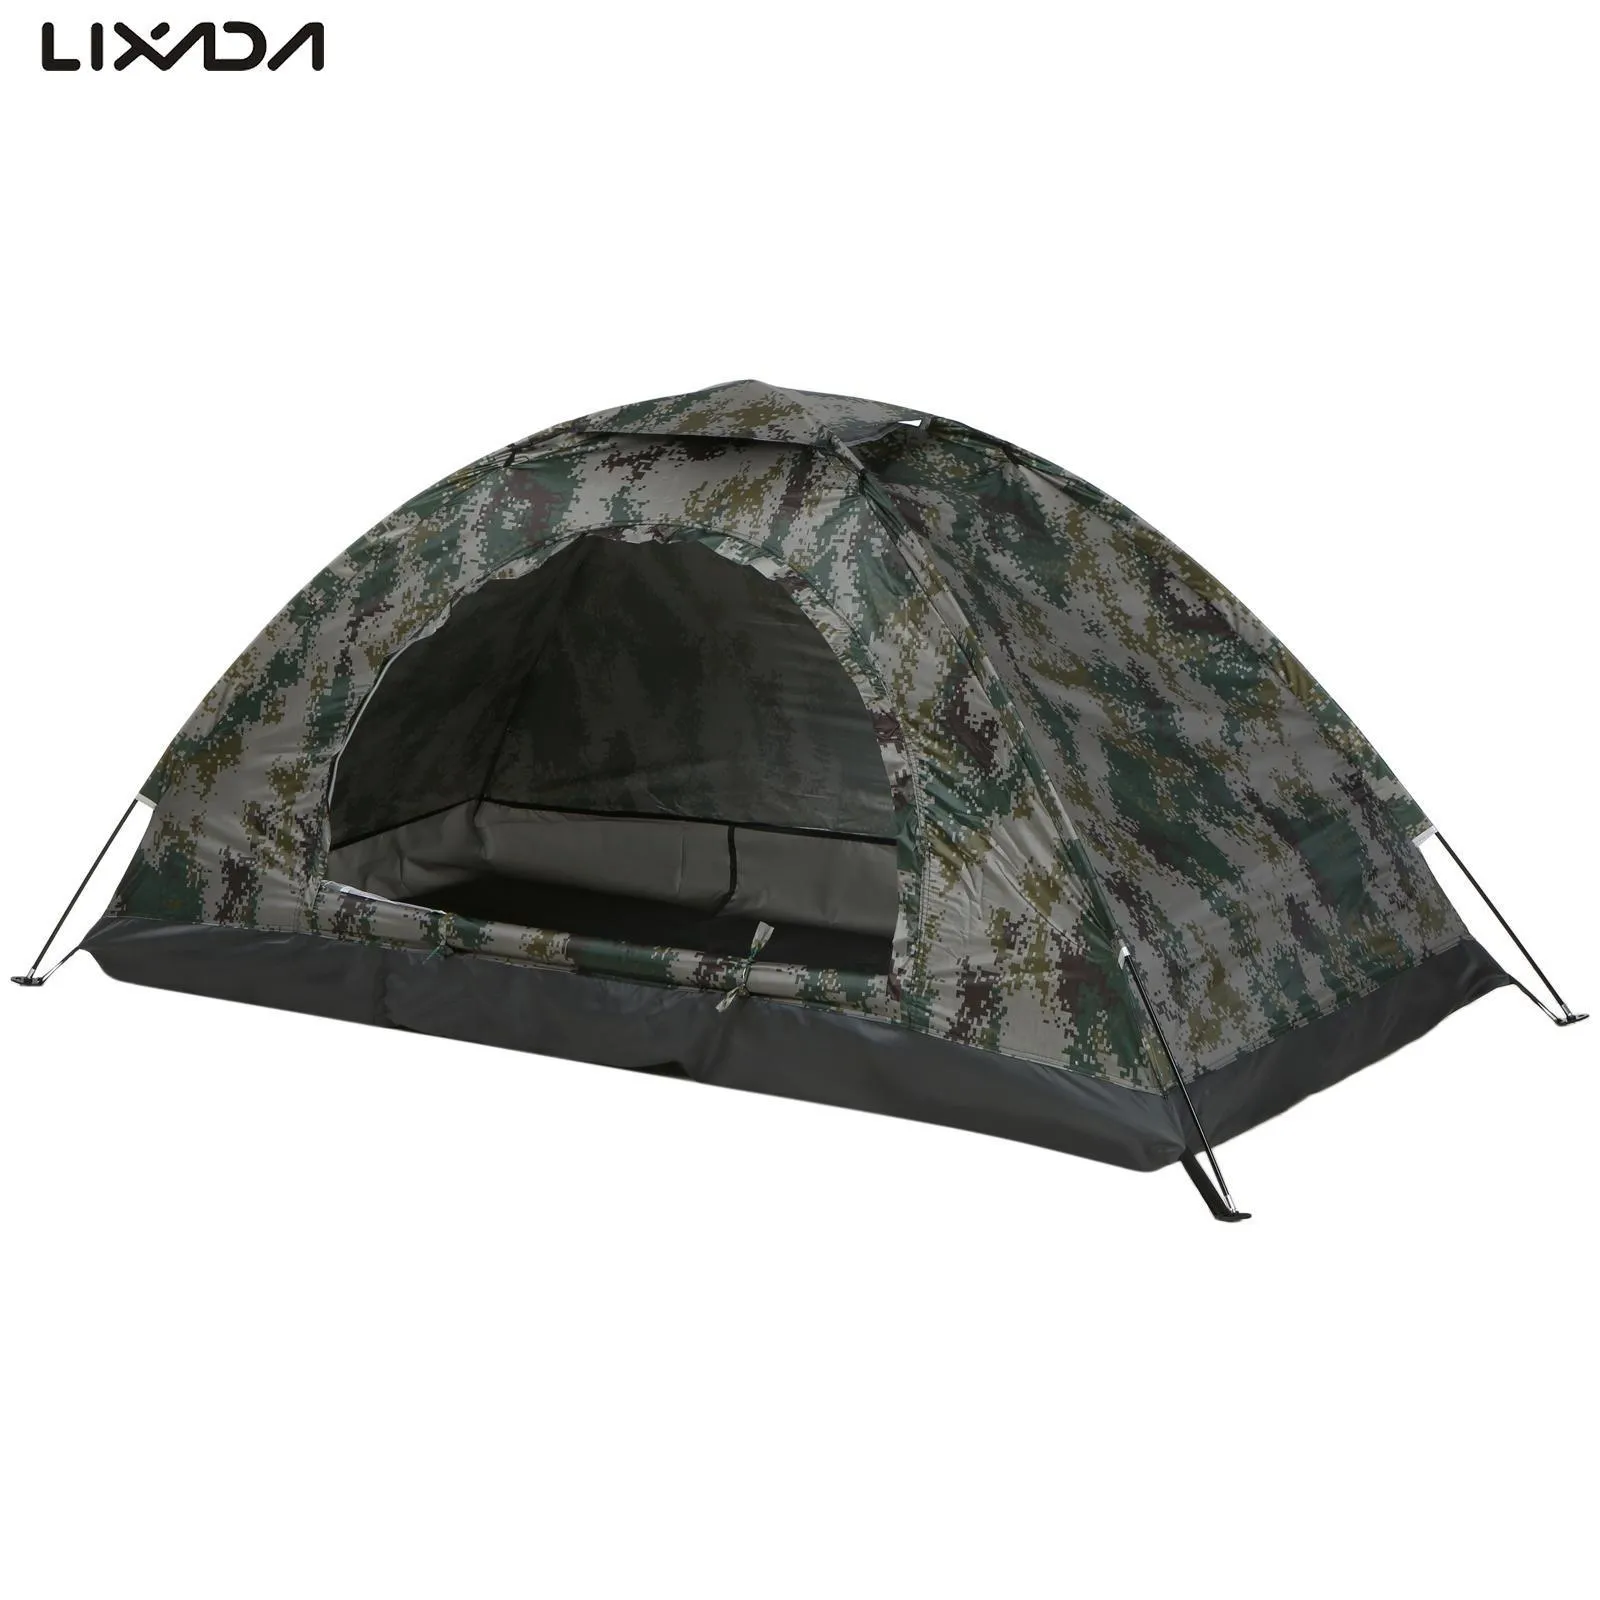 Tents and Shelters Ultralight Camping Tent UPF 30 AntiUV Coating Beach Portable SingleDouble Person Outdoor Hiking Sleeping Gears 230617